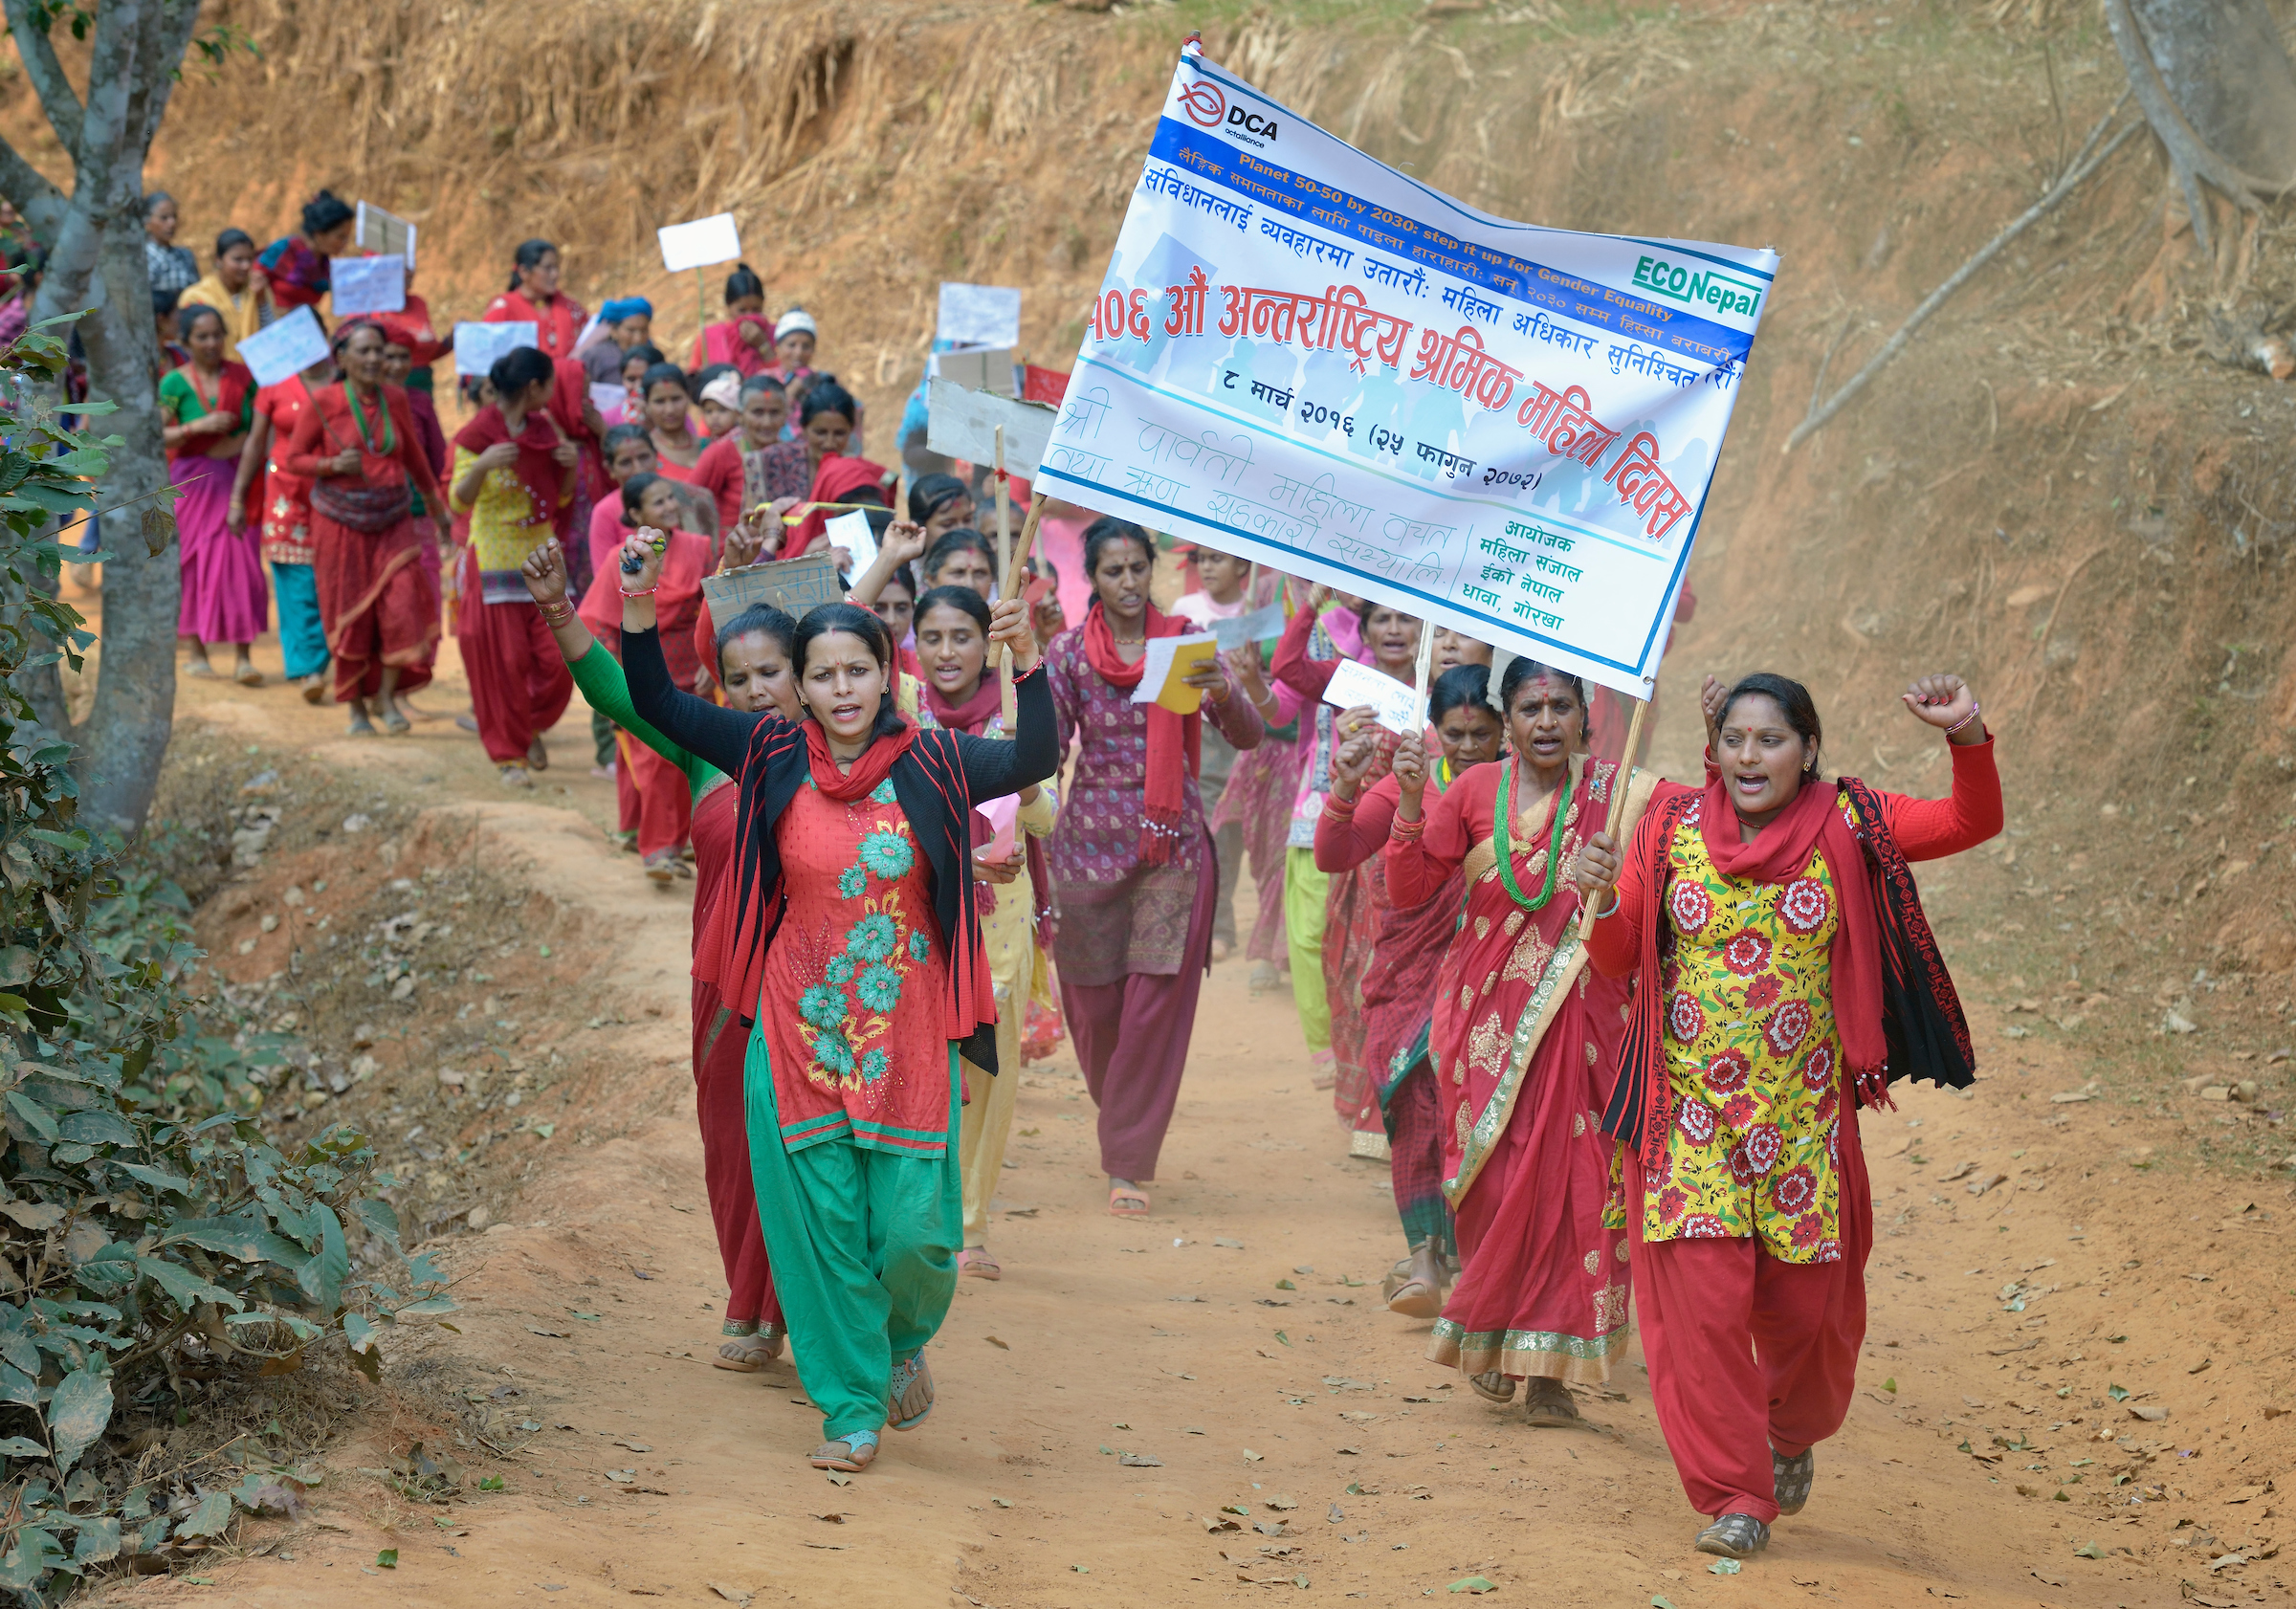 Women march together in celebration of International Women's Day on March 8, 2016, in Dhawa, a village in the Gorkha District of Nepal. Photo: Paul Jeffrey